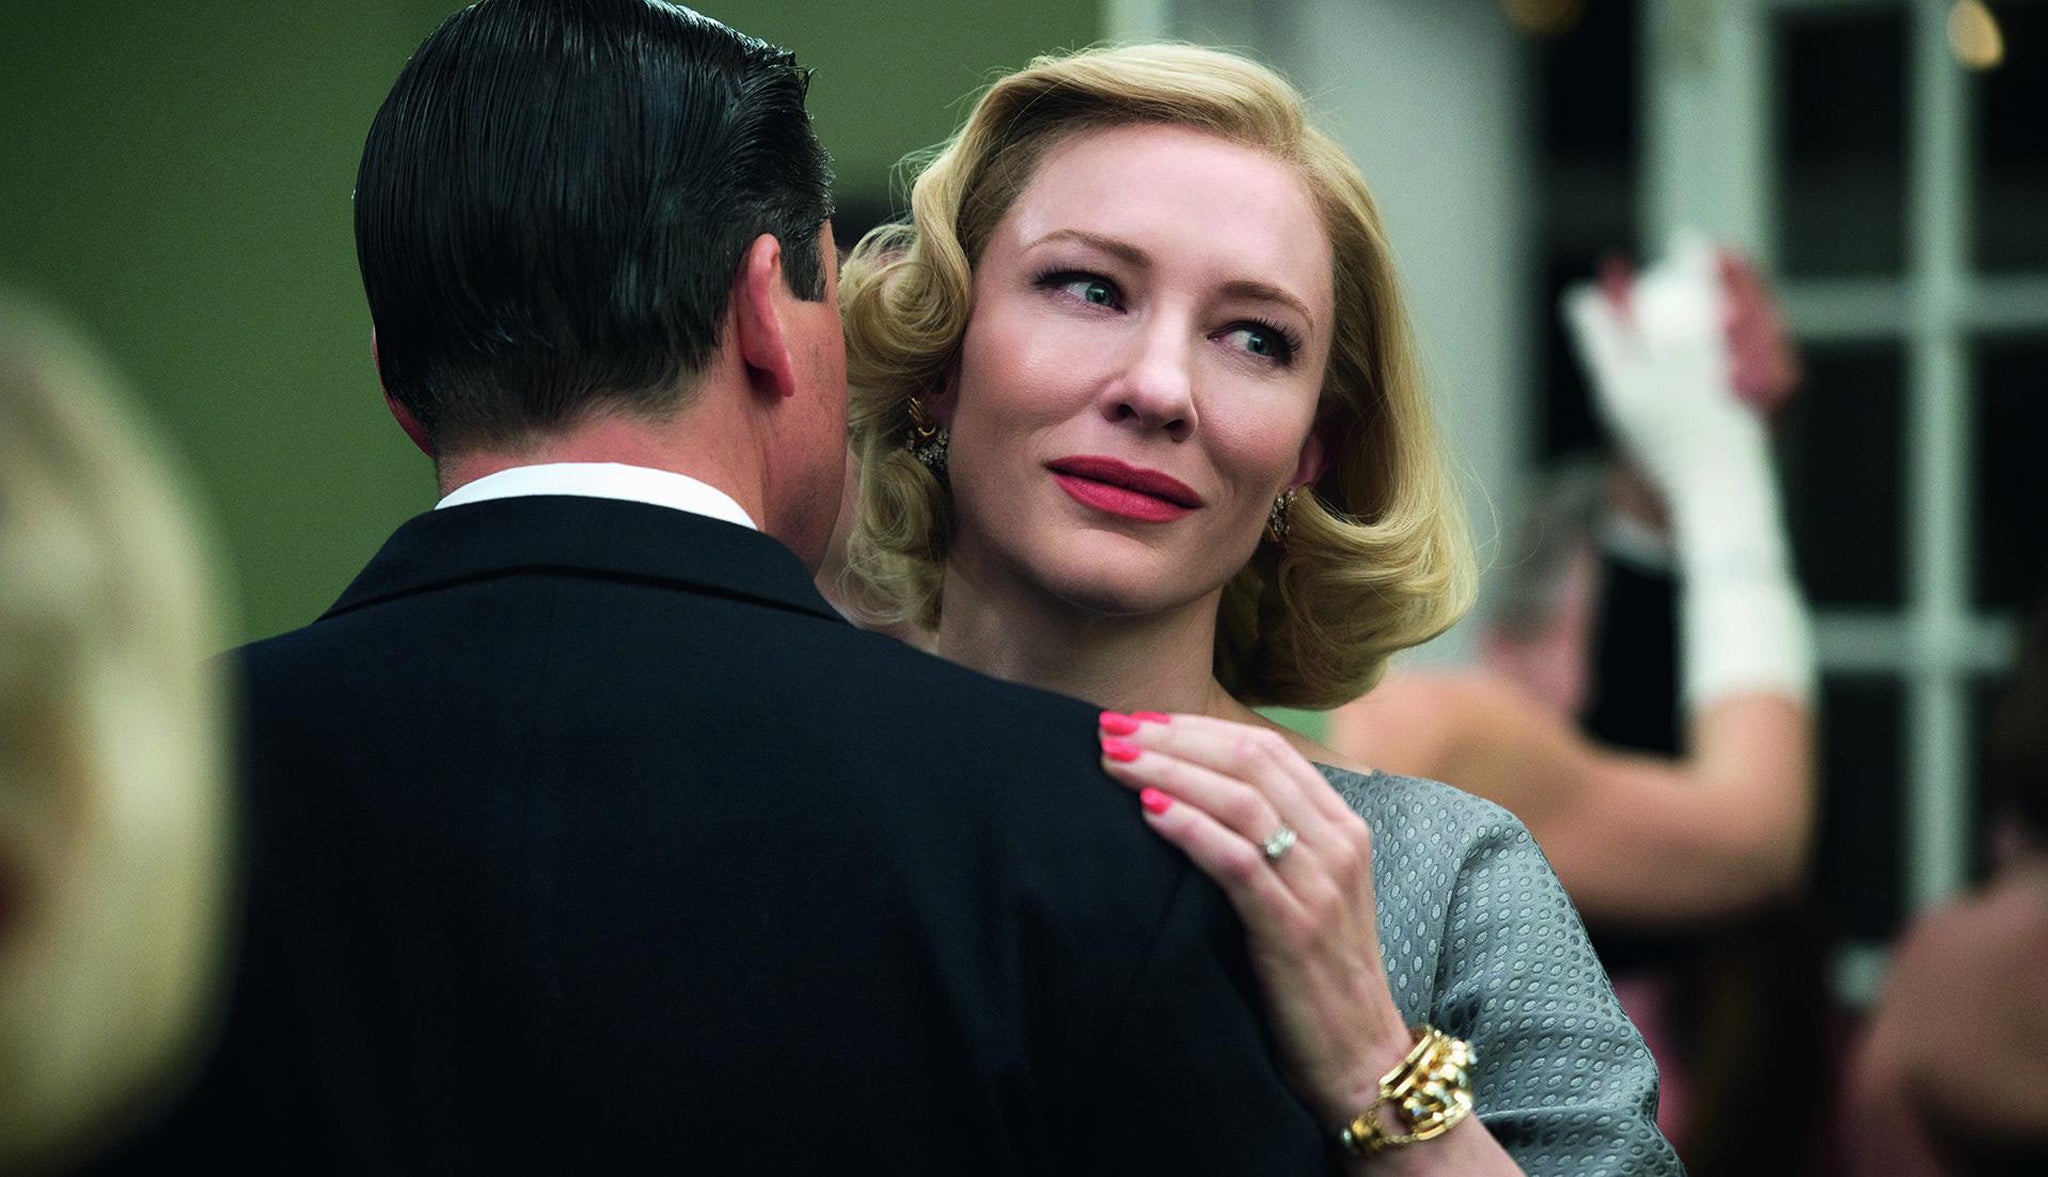 Cate Blanchett stars in Carol as a woman who realises she has lesbian desires